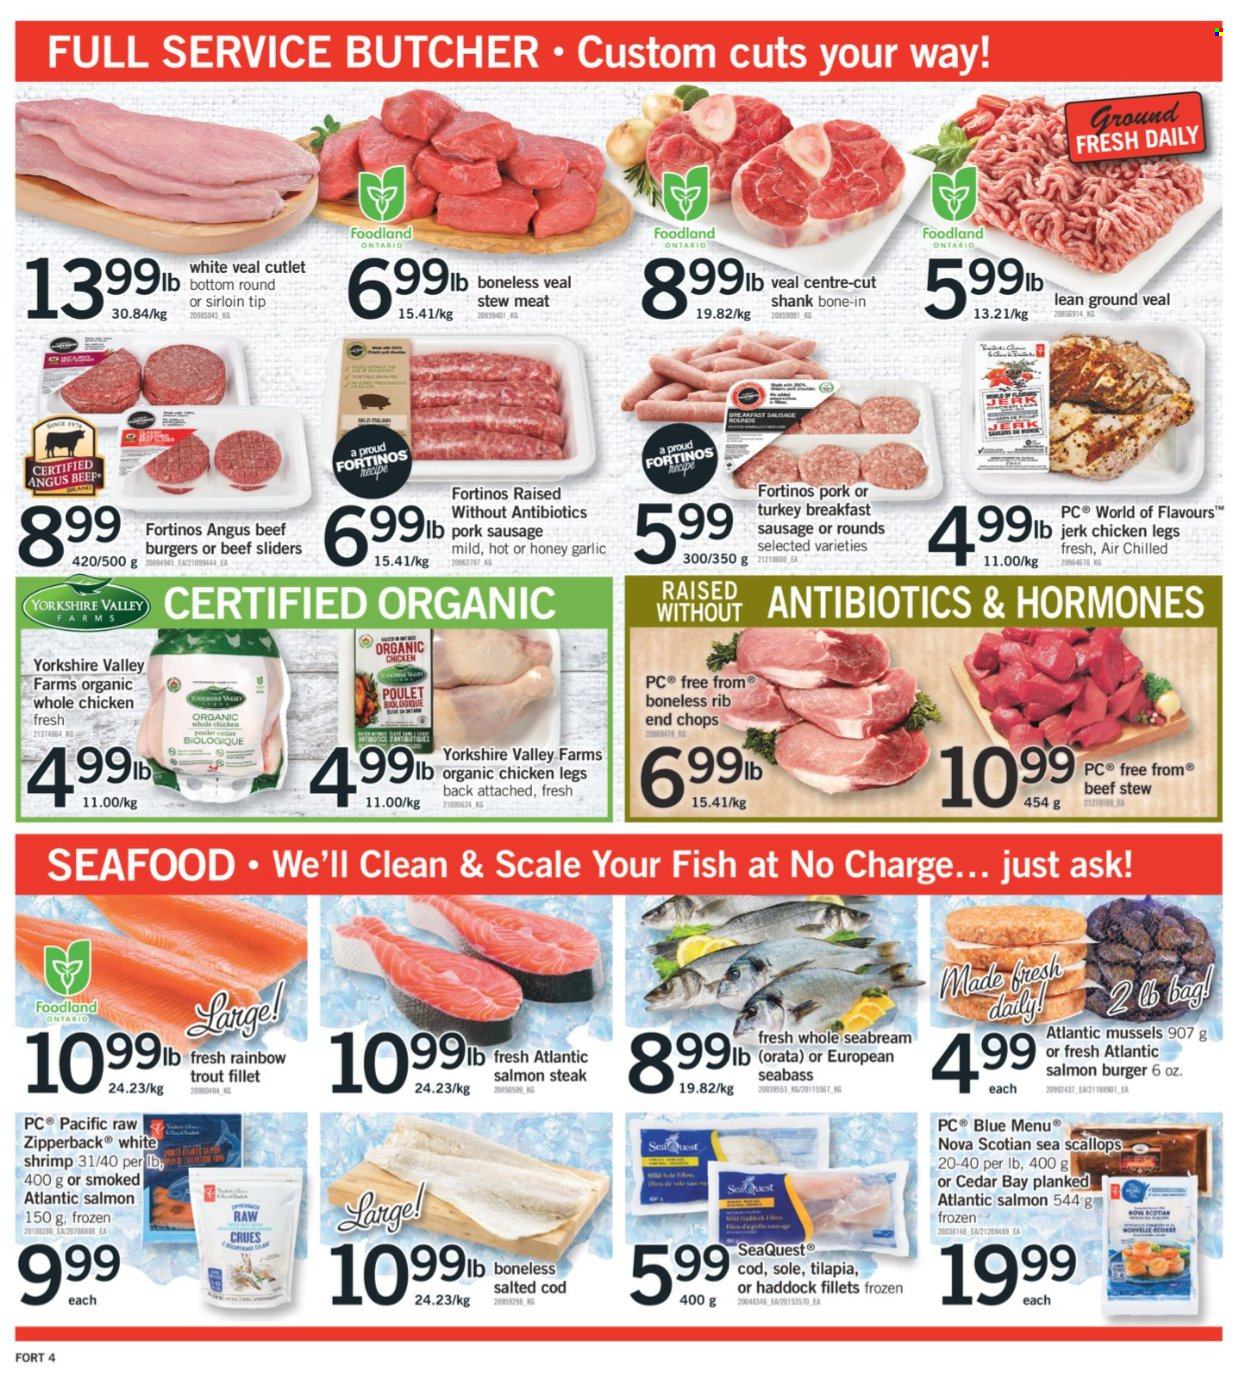 thumbnail - Fortinos Flyer - September 16, 2021 - September 22, 2021 - Sales products - stew meat, scale, garlic, cod, mussels, salmon, scallops, sea bass, tilapia, trout, haddock, seafood, fish, seabream, shrimps, hamburger, beef burger, sausage, pork sausage, whole chicken, chicken legs, chicken, beef meat, ground veal, veal cutlet, veal meat, steak. Page 4.